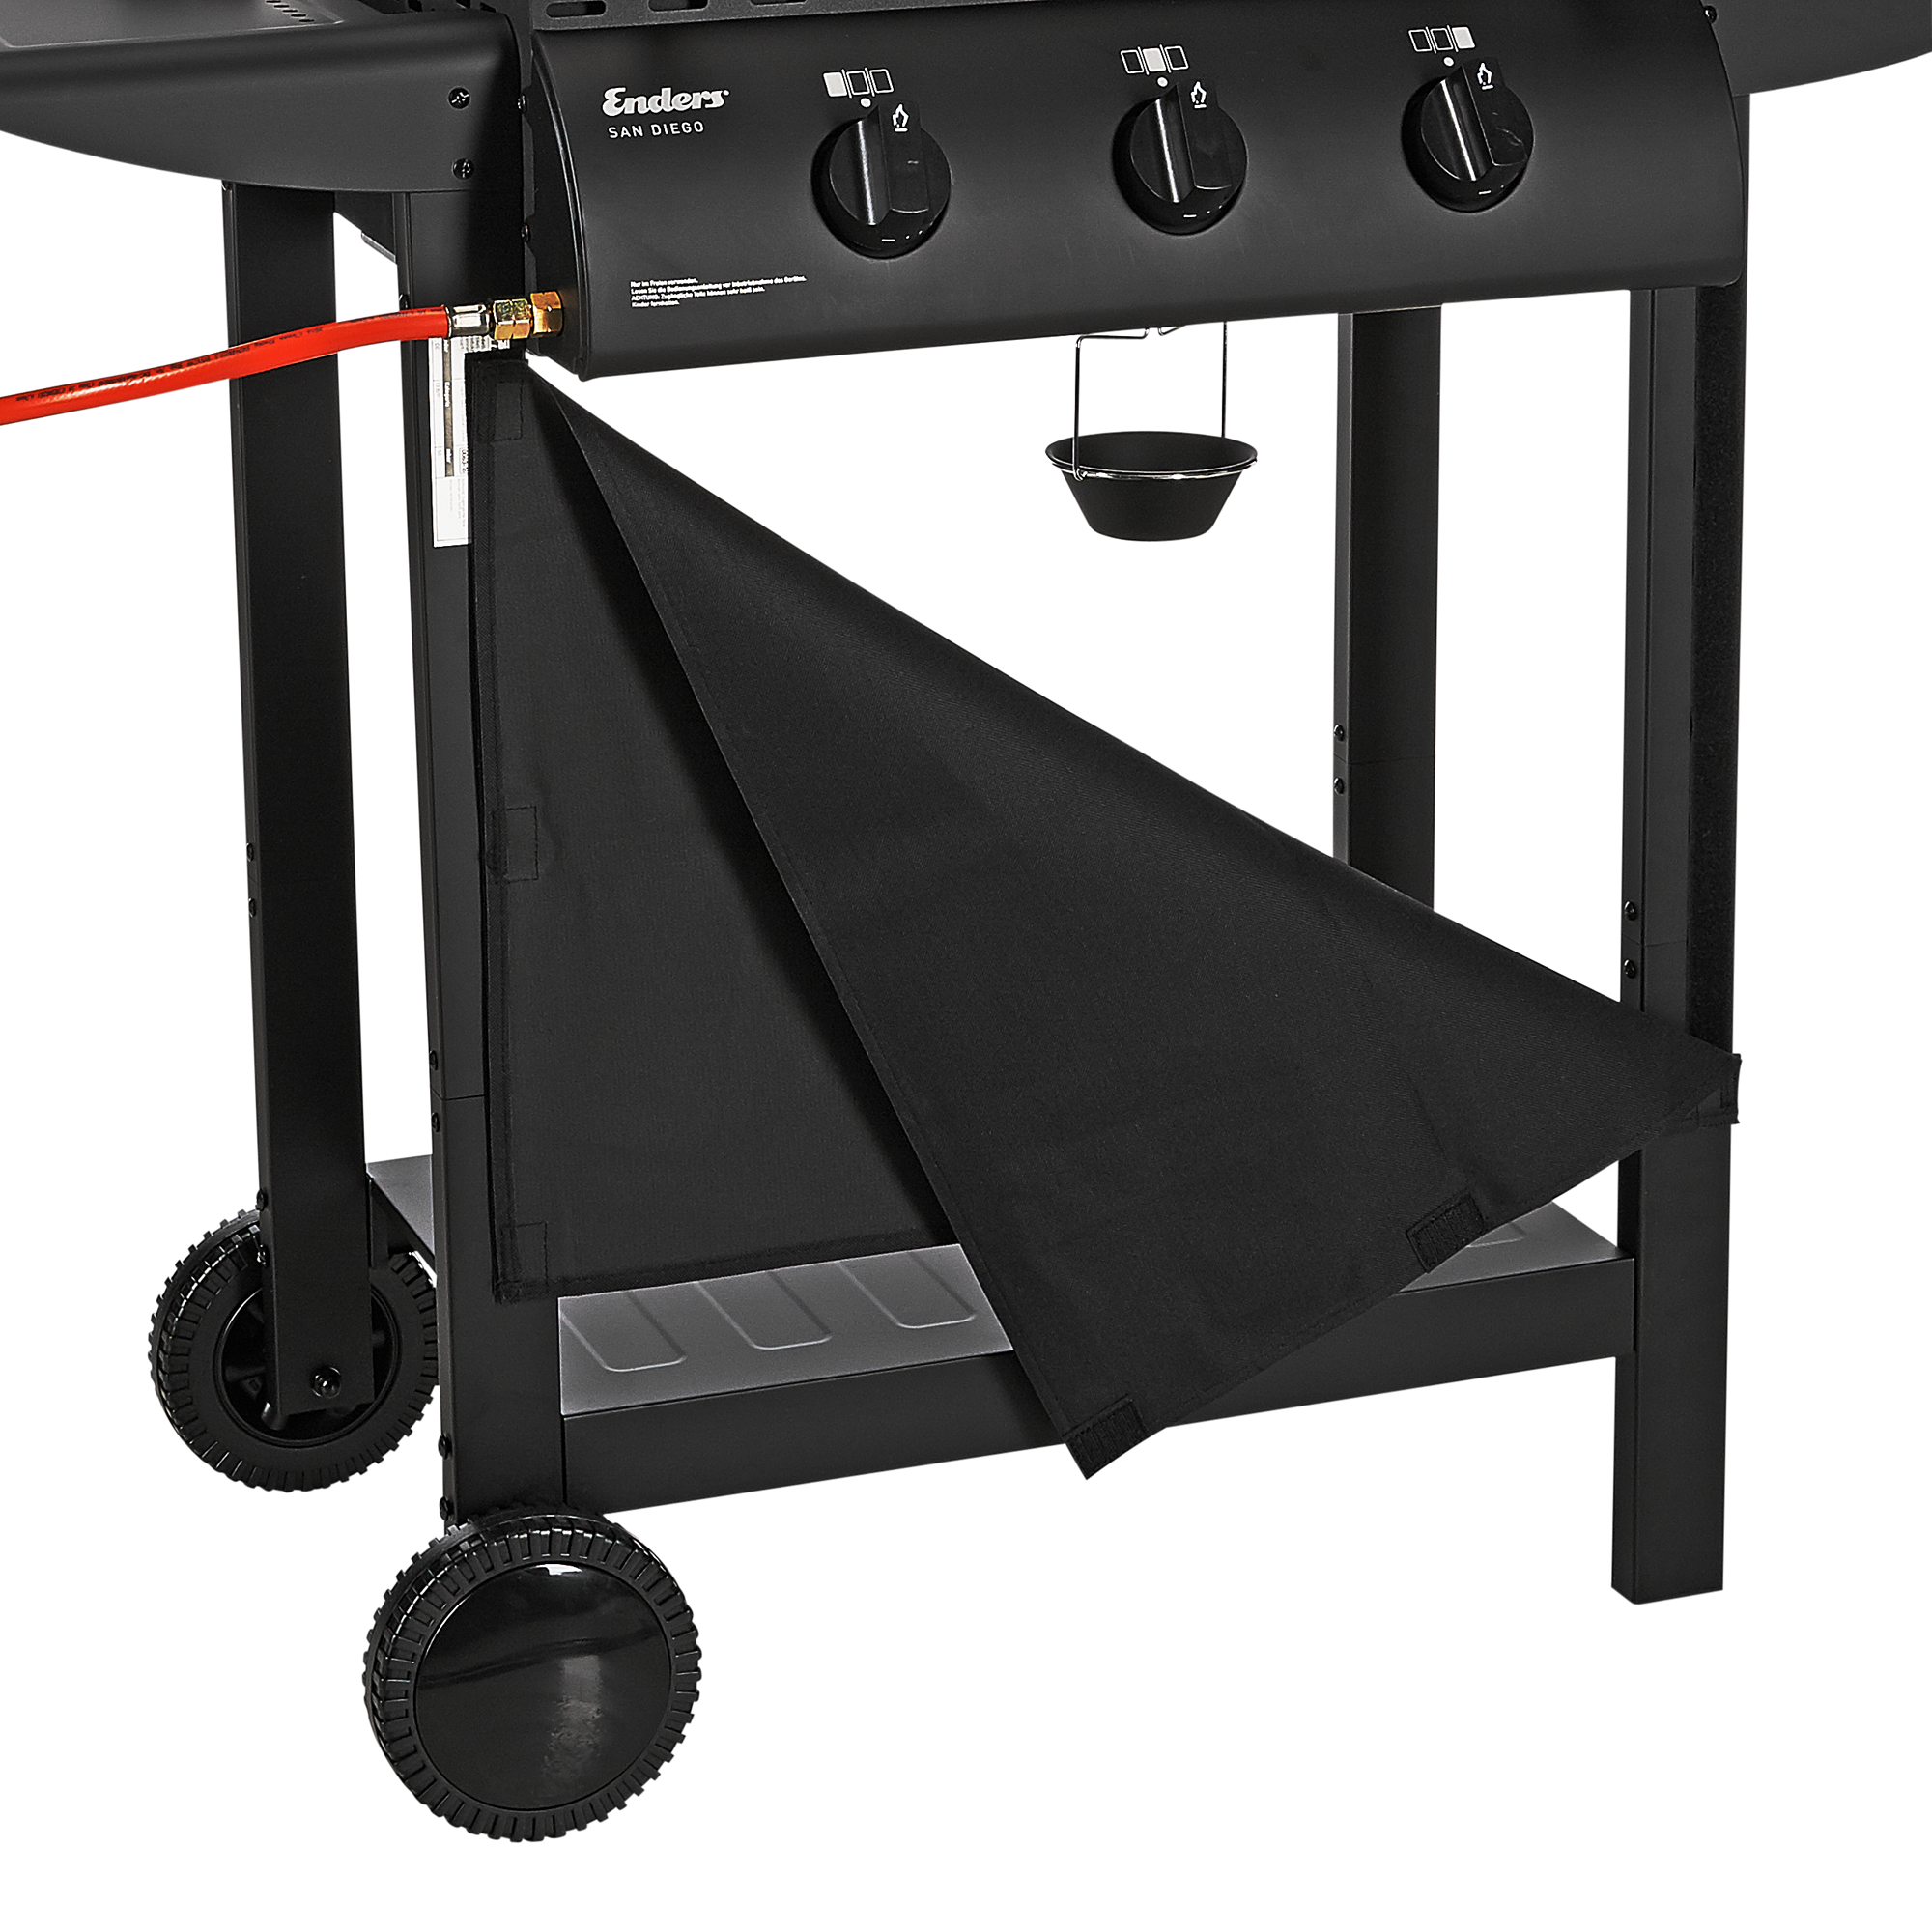 Gasgrill 'San Diego 3' Metall schwarz 50,5 x 33 cm + product picture